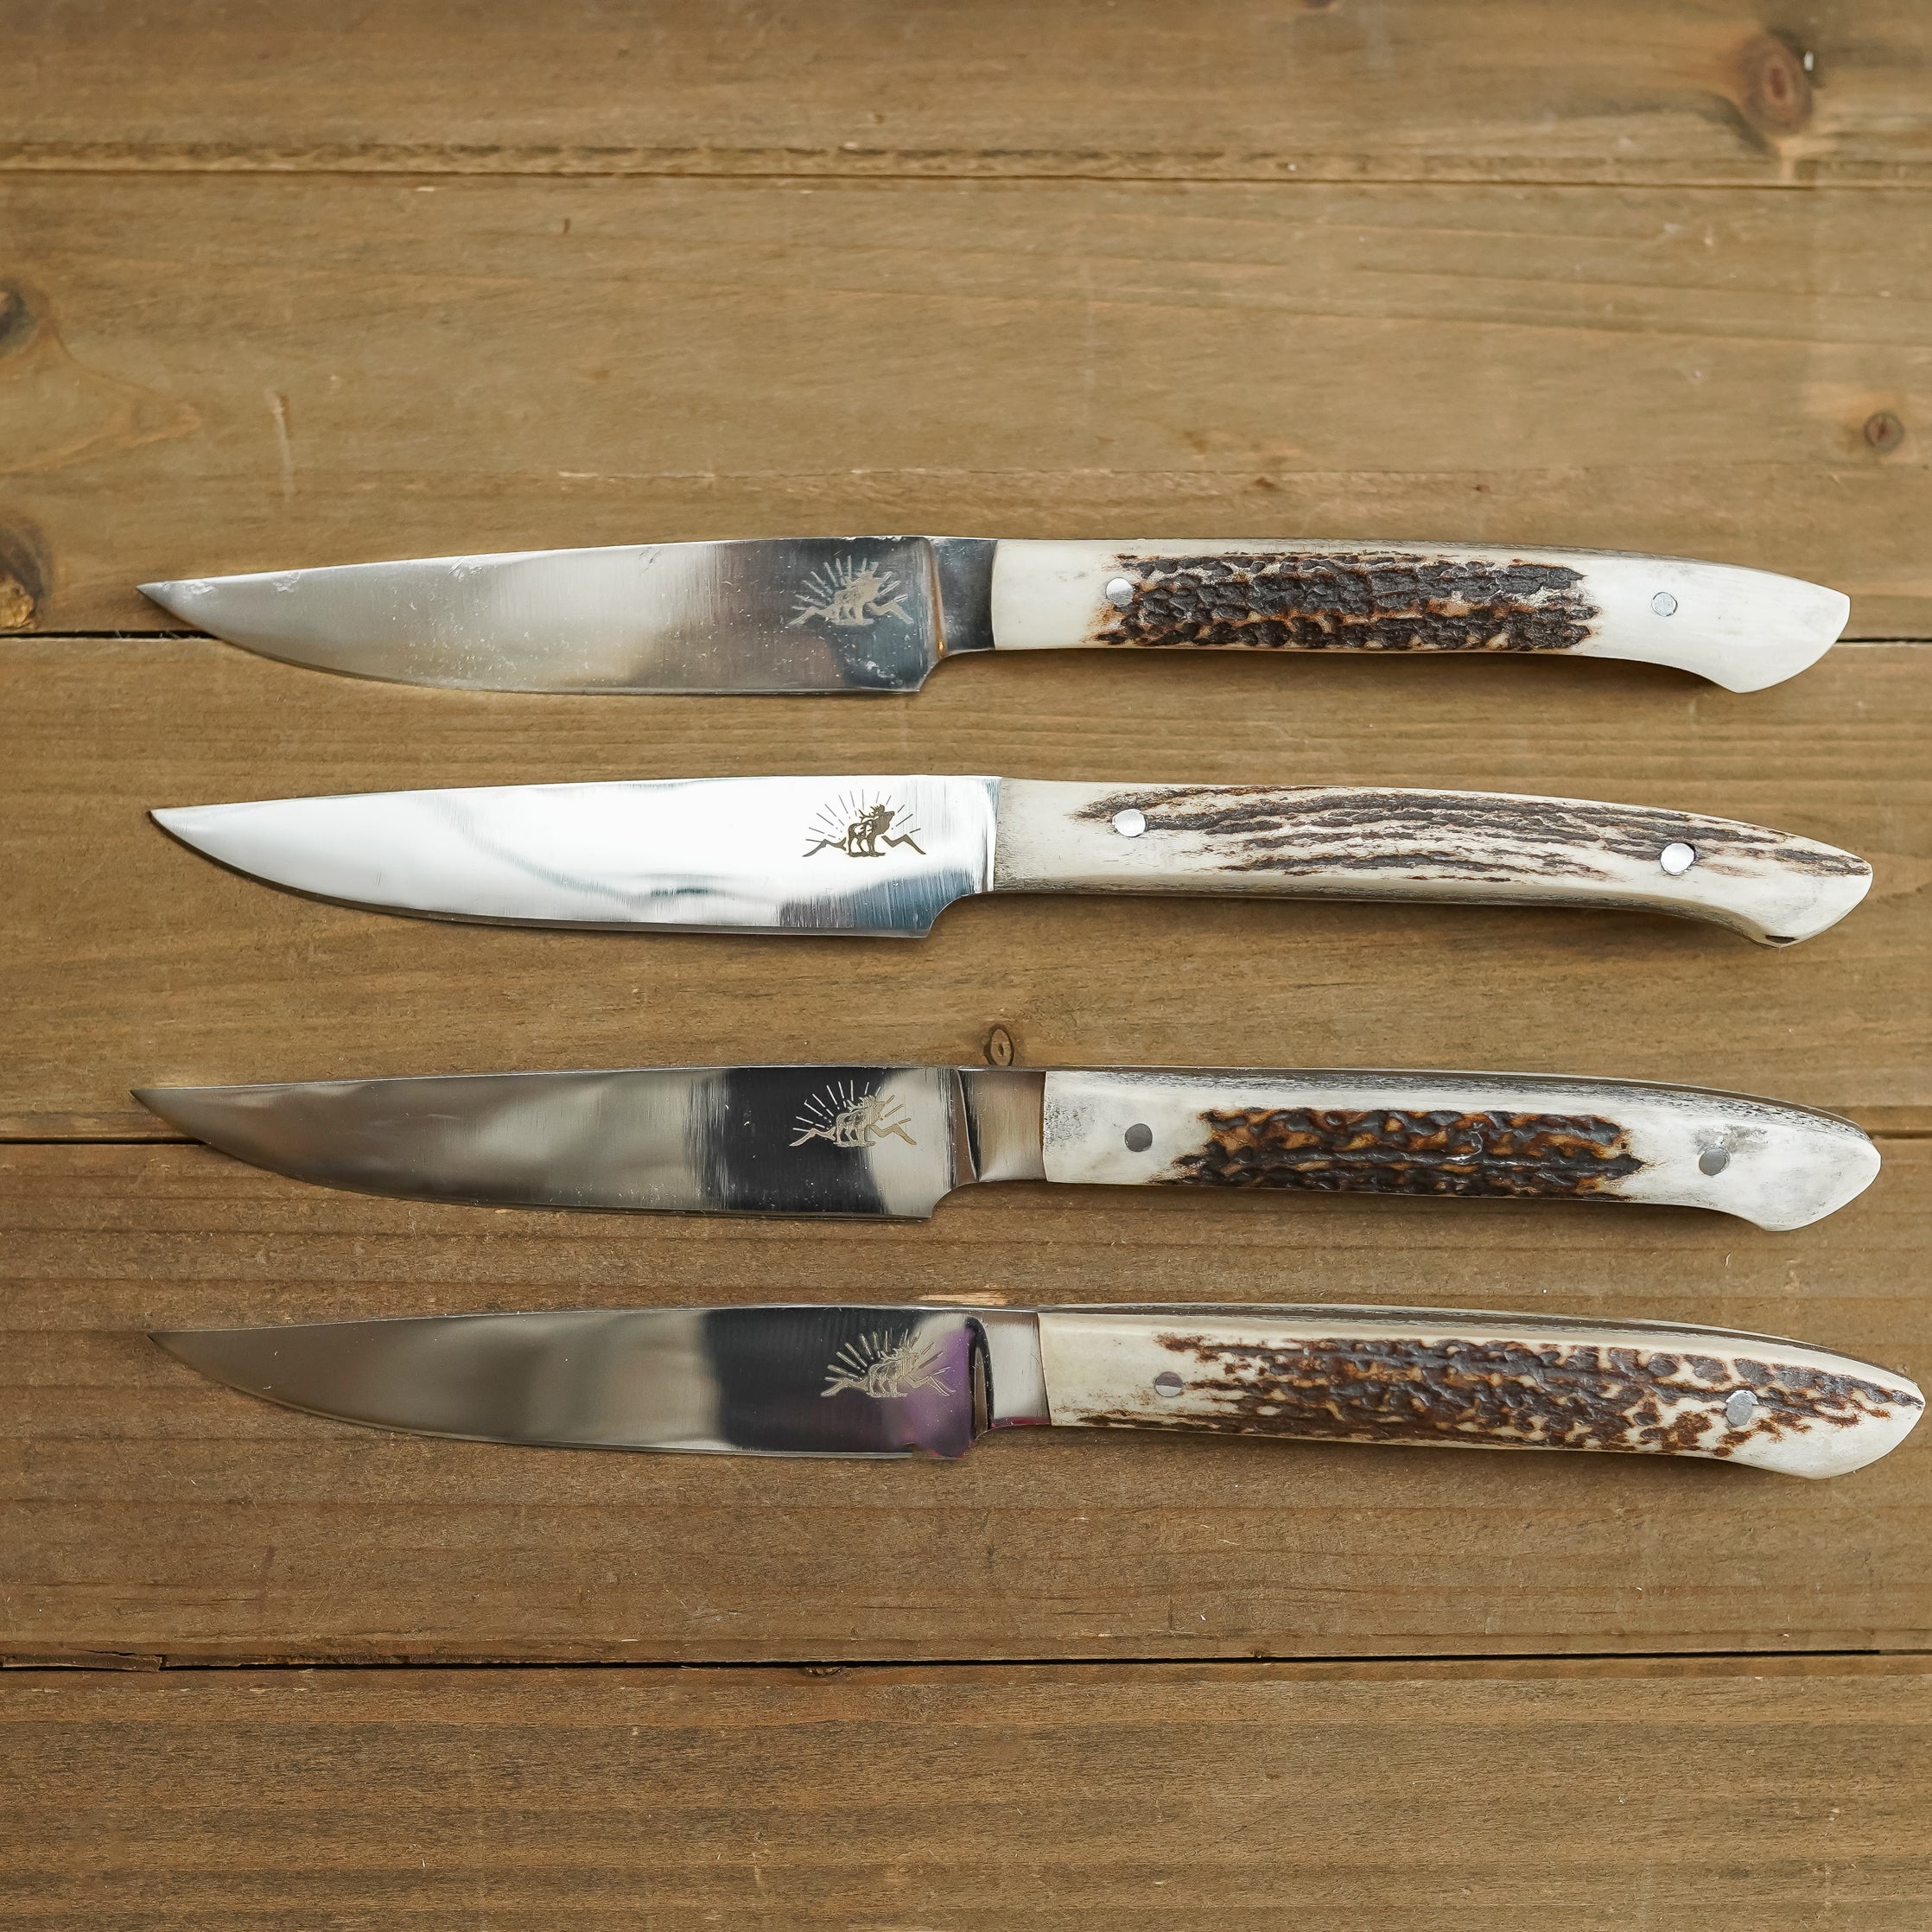 Knife Sets - High-end crafted knives by Folded Steel